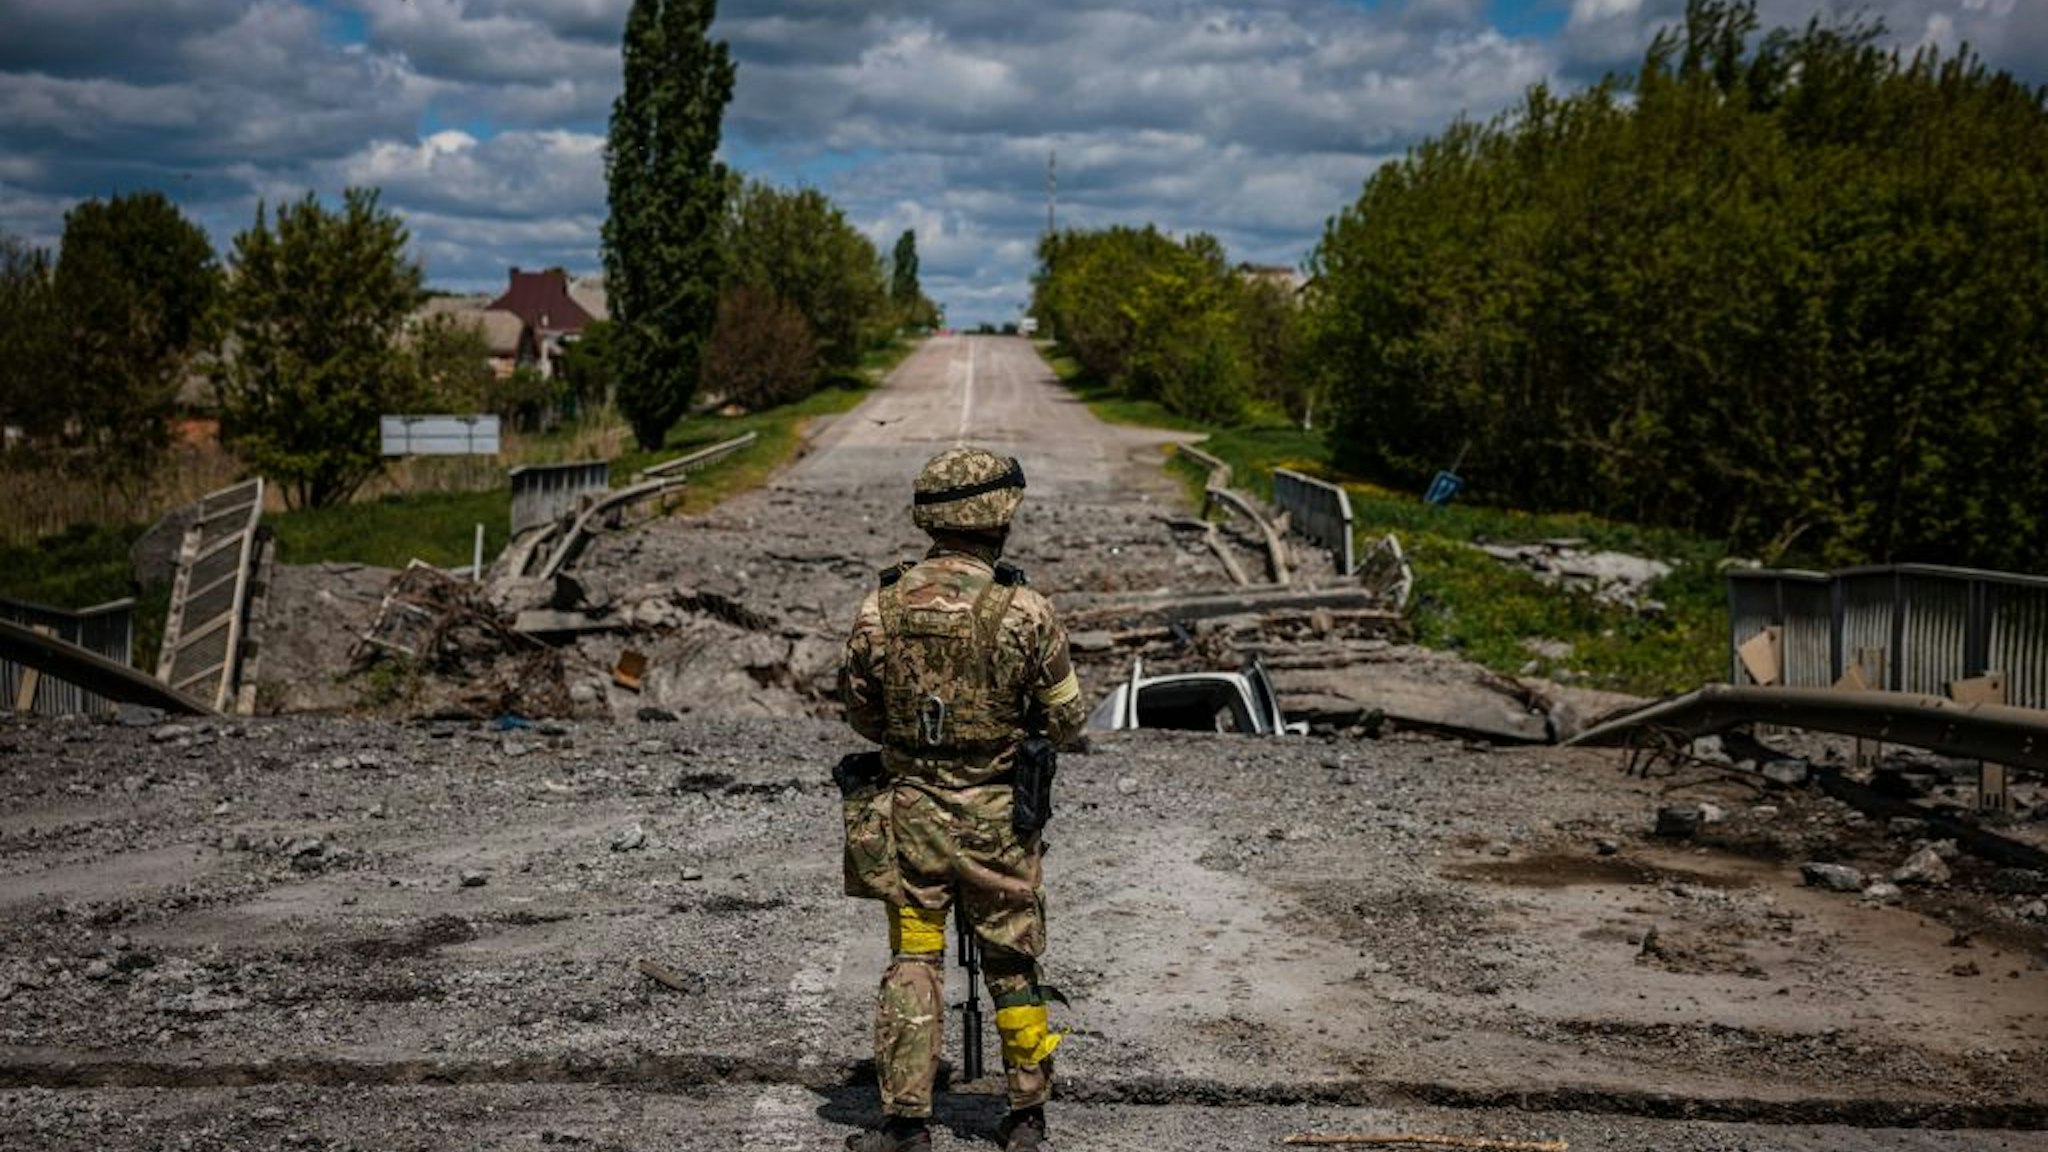 A soldier of the Kraken Ukrainian special forces unit observes the area at a destroyed bridge on the road near the village of Rus'ka Lozova, north of Kharkiv, on May 16, 2022. - Ukraine has said its troops have regained control of territory on the Russian border near the country's second-largest city of Kharkiv, which has been under constant fire since Moscow's invasion began. (Photo by Dimitar DILKOFF / AFP) (Photo by DIMITAR DILKOFF/AFP via Getty Images)